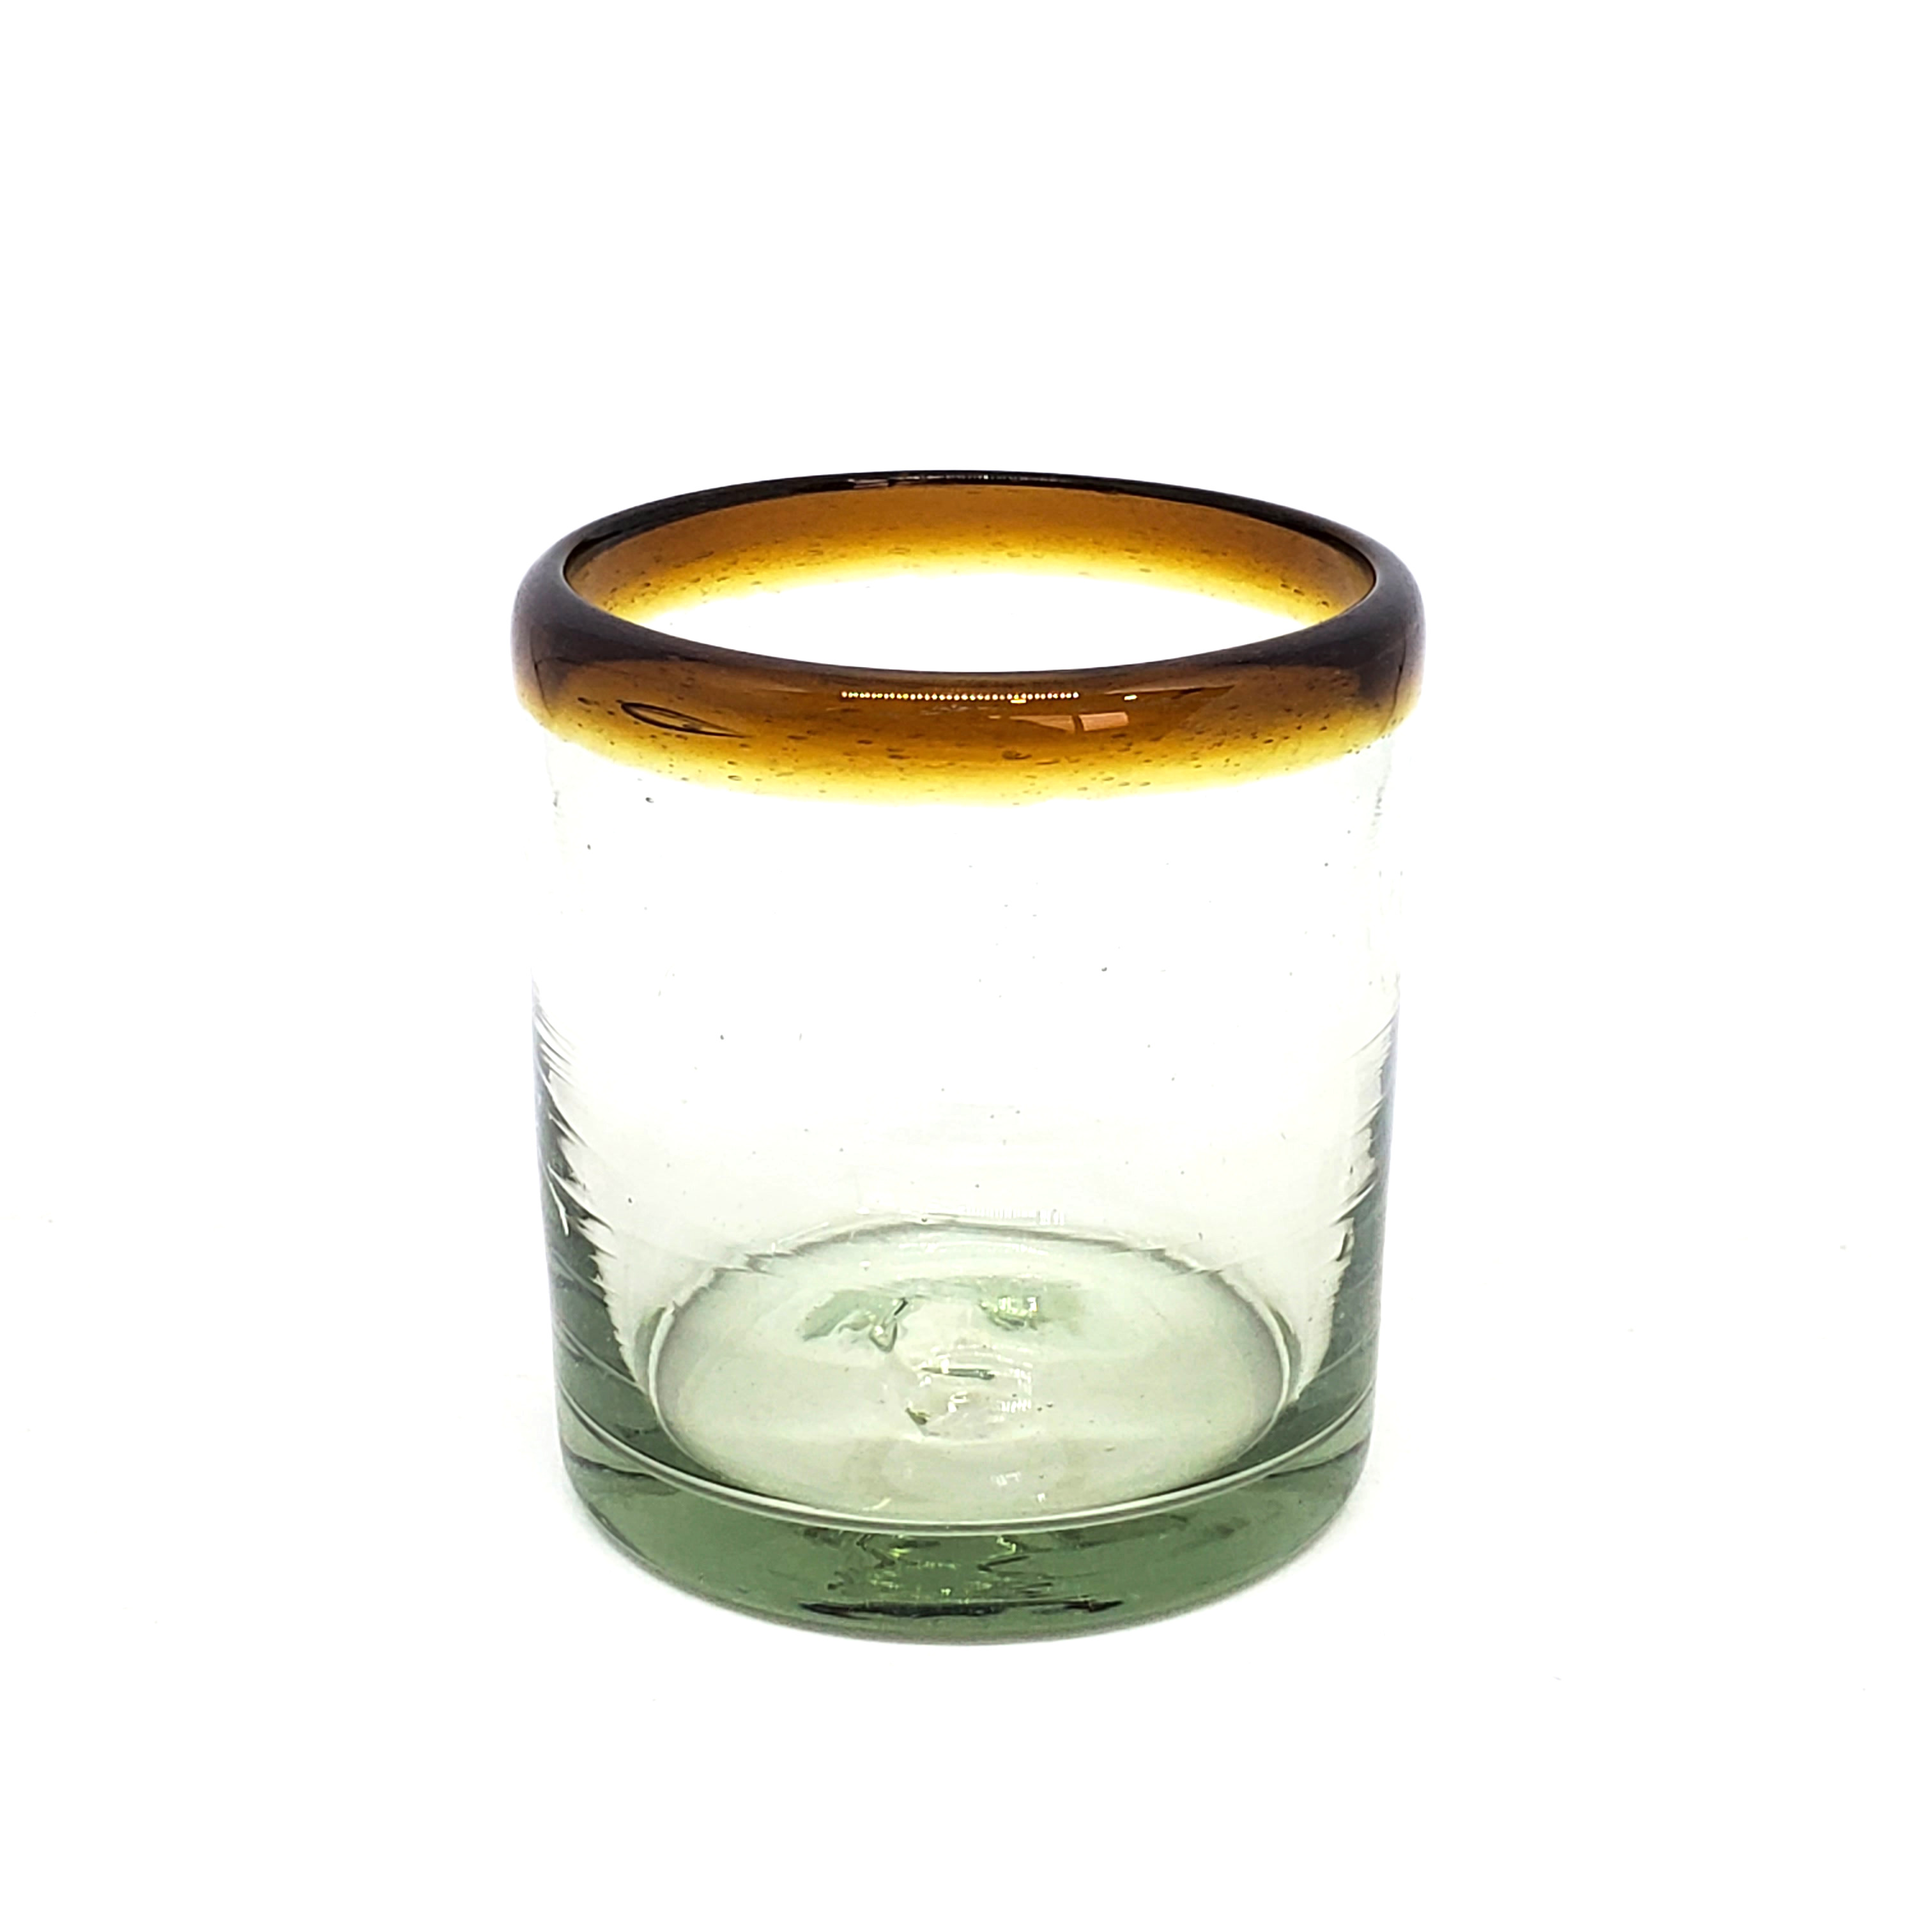 Amber Rim Glassware / Amber Rim 8 oz DOF Rock Glasses (set of 6) / These Double Old Fashioned glasses deliver a classic touch to your favorite drink on the rocks.